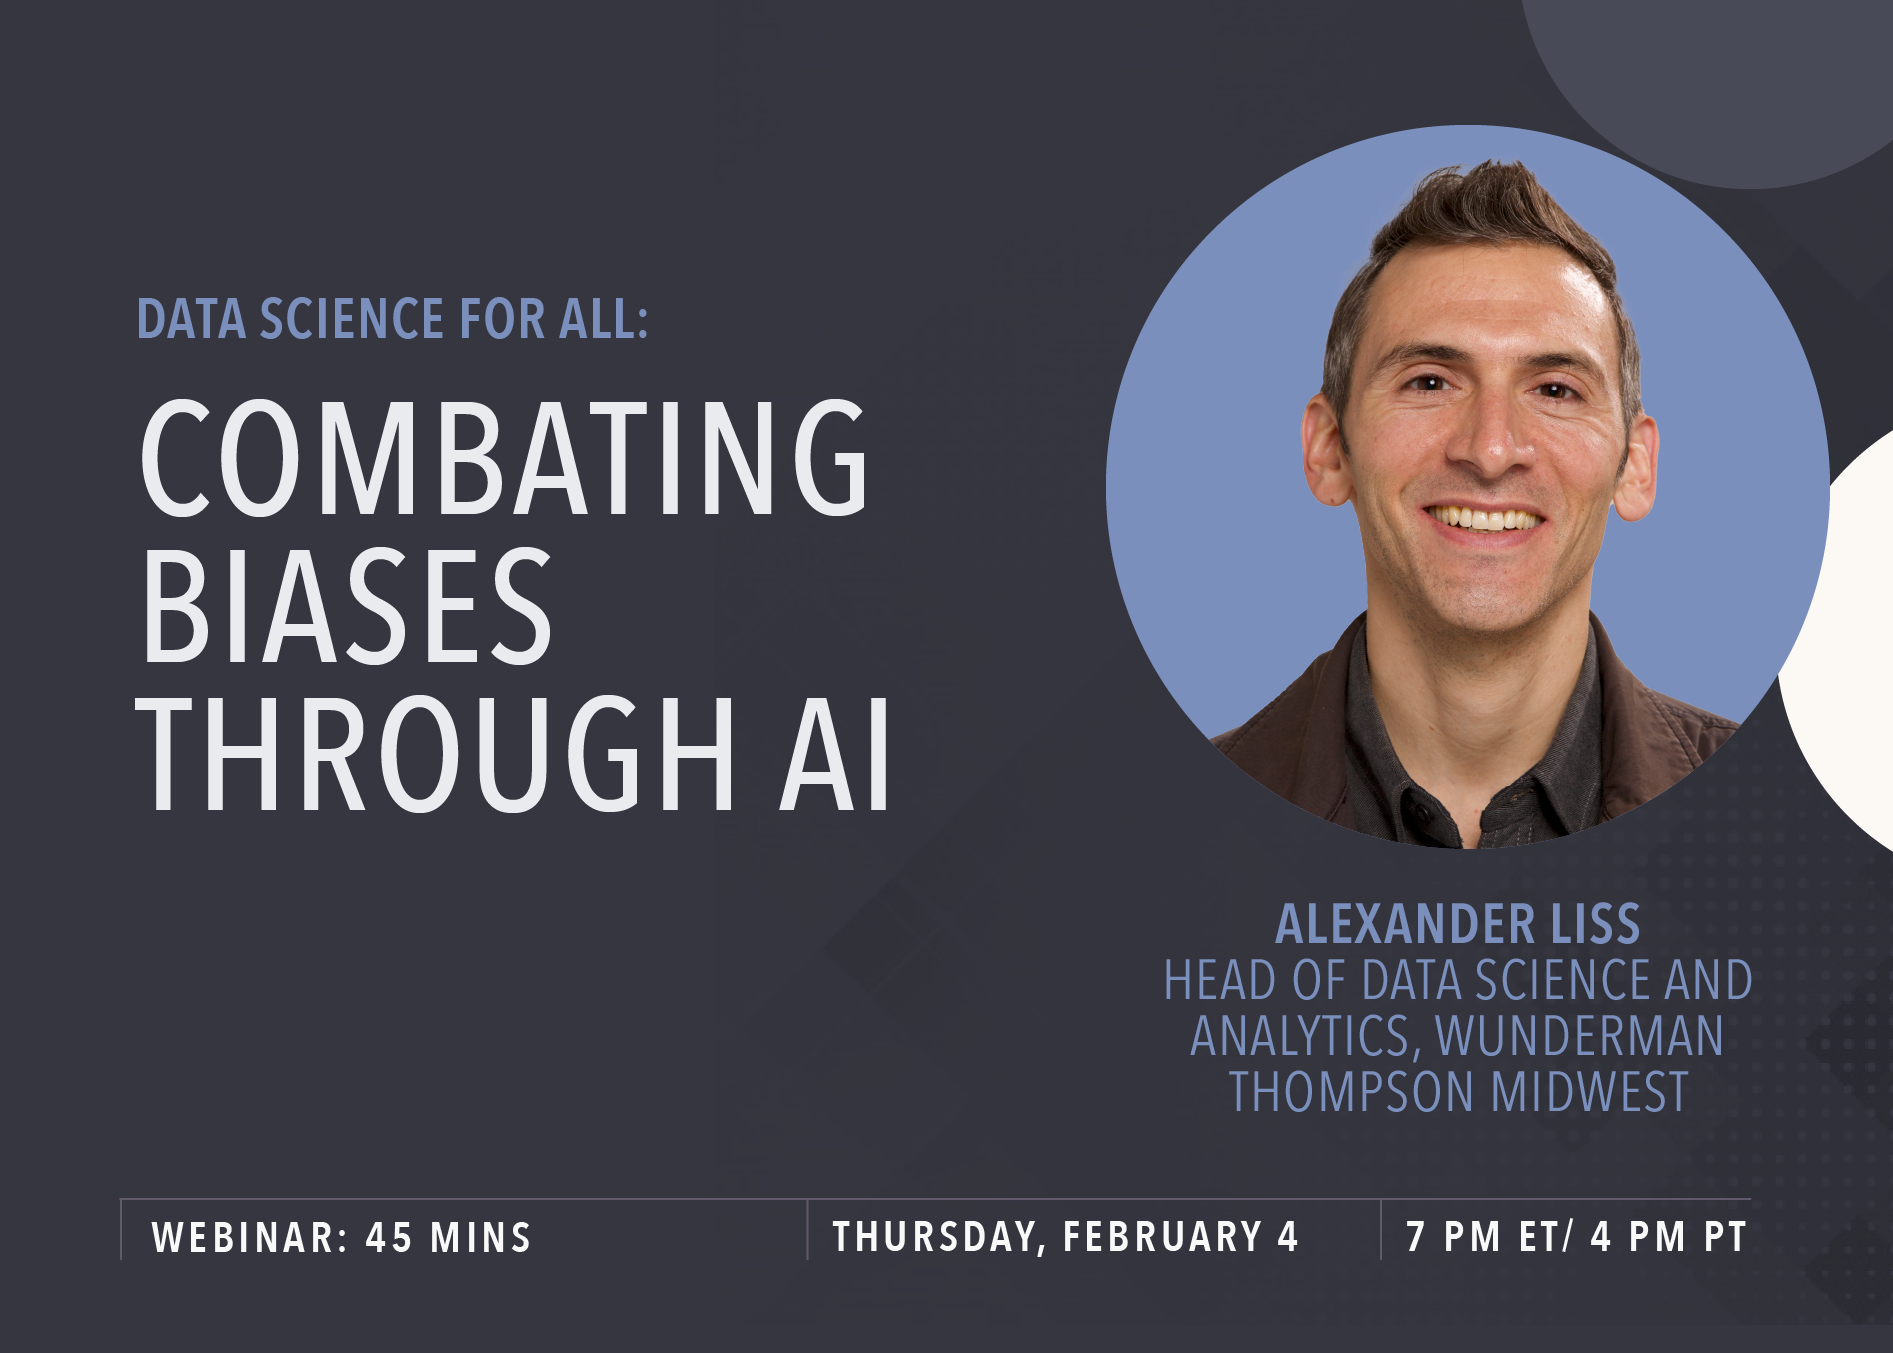 Data Science for All: Combating Biases with AI featuring Alex Liss, Head of Data Science and Analytics at Wunderman Thompson.